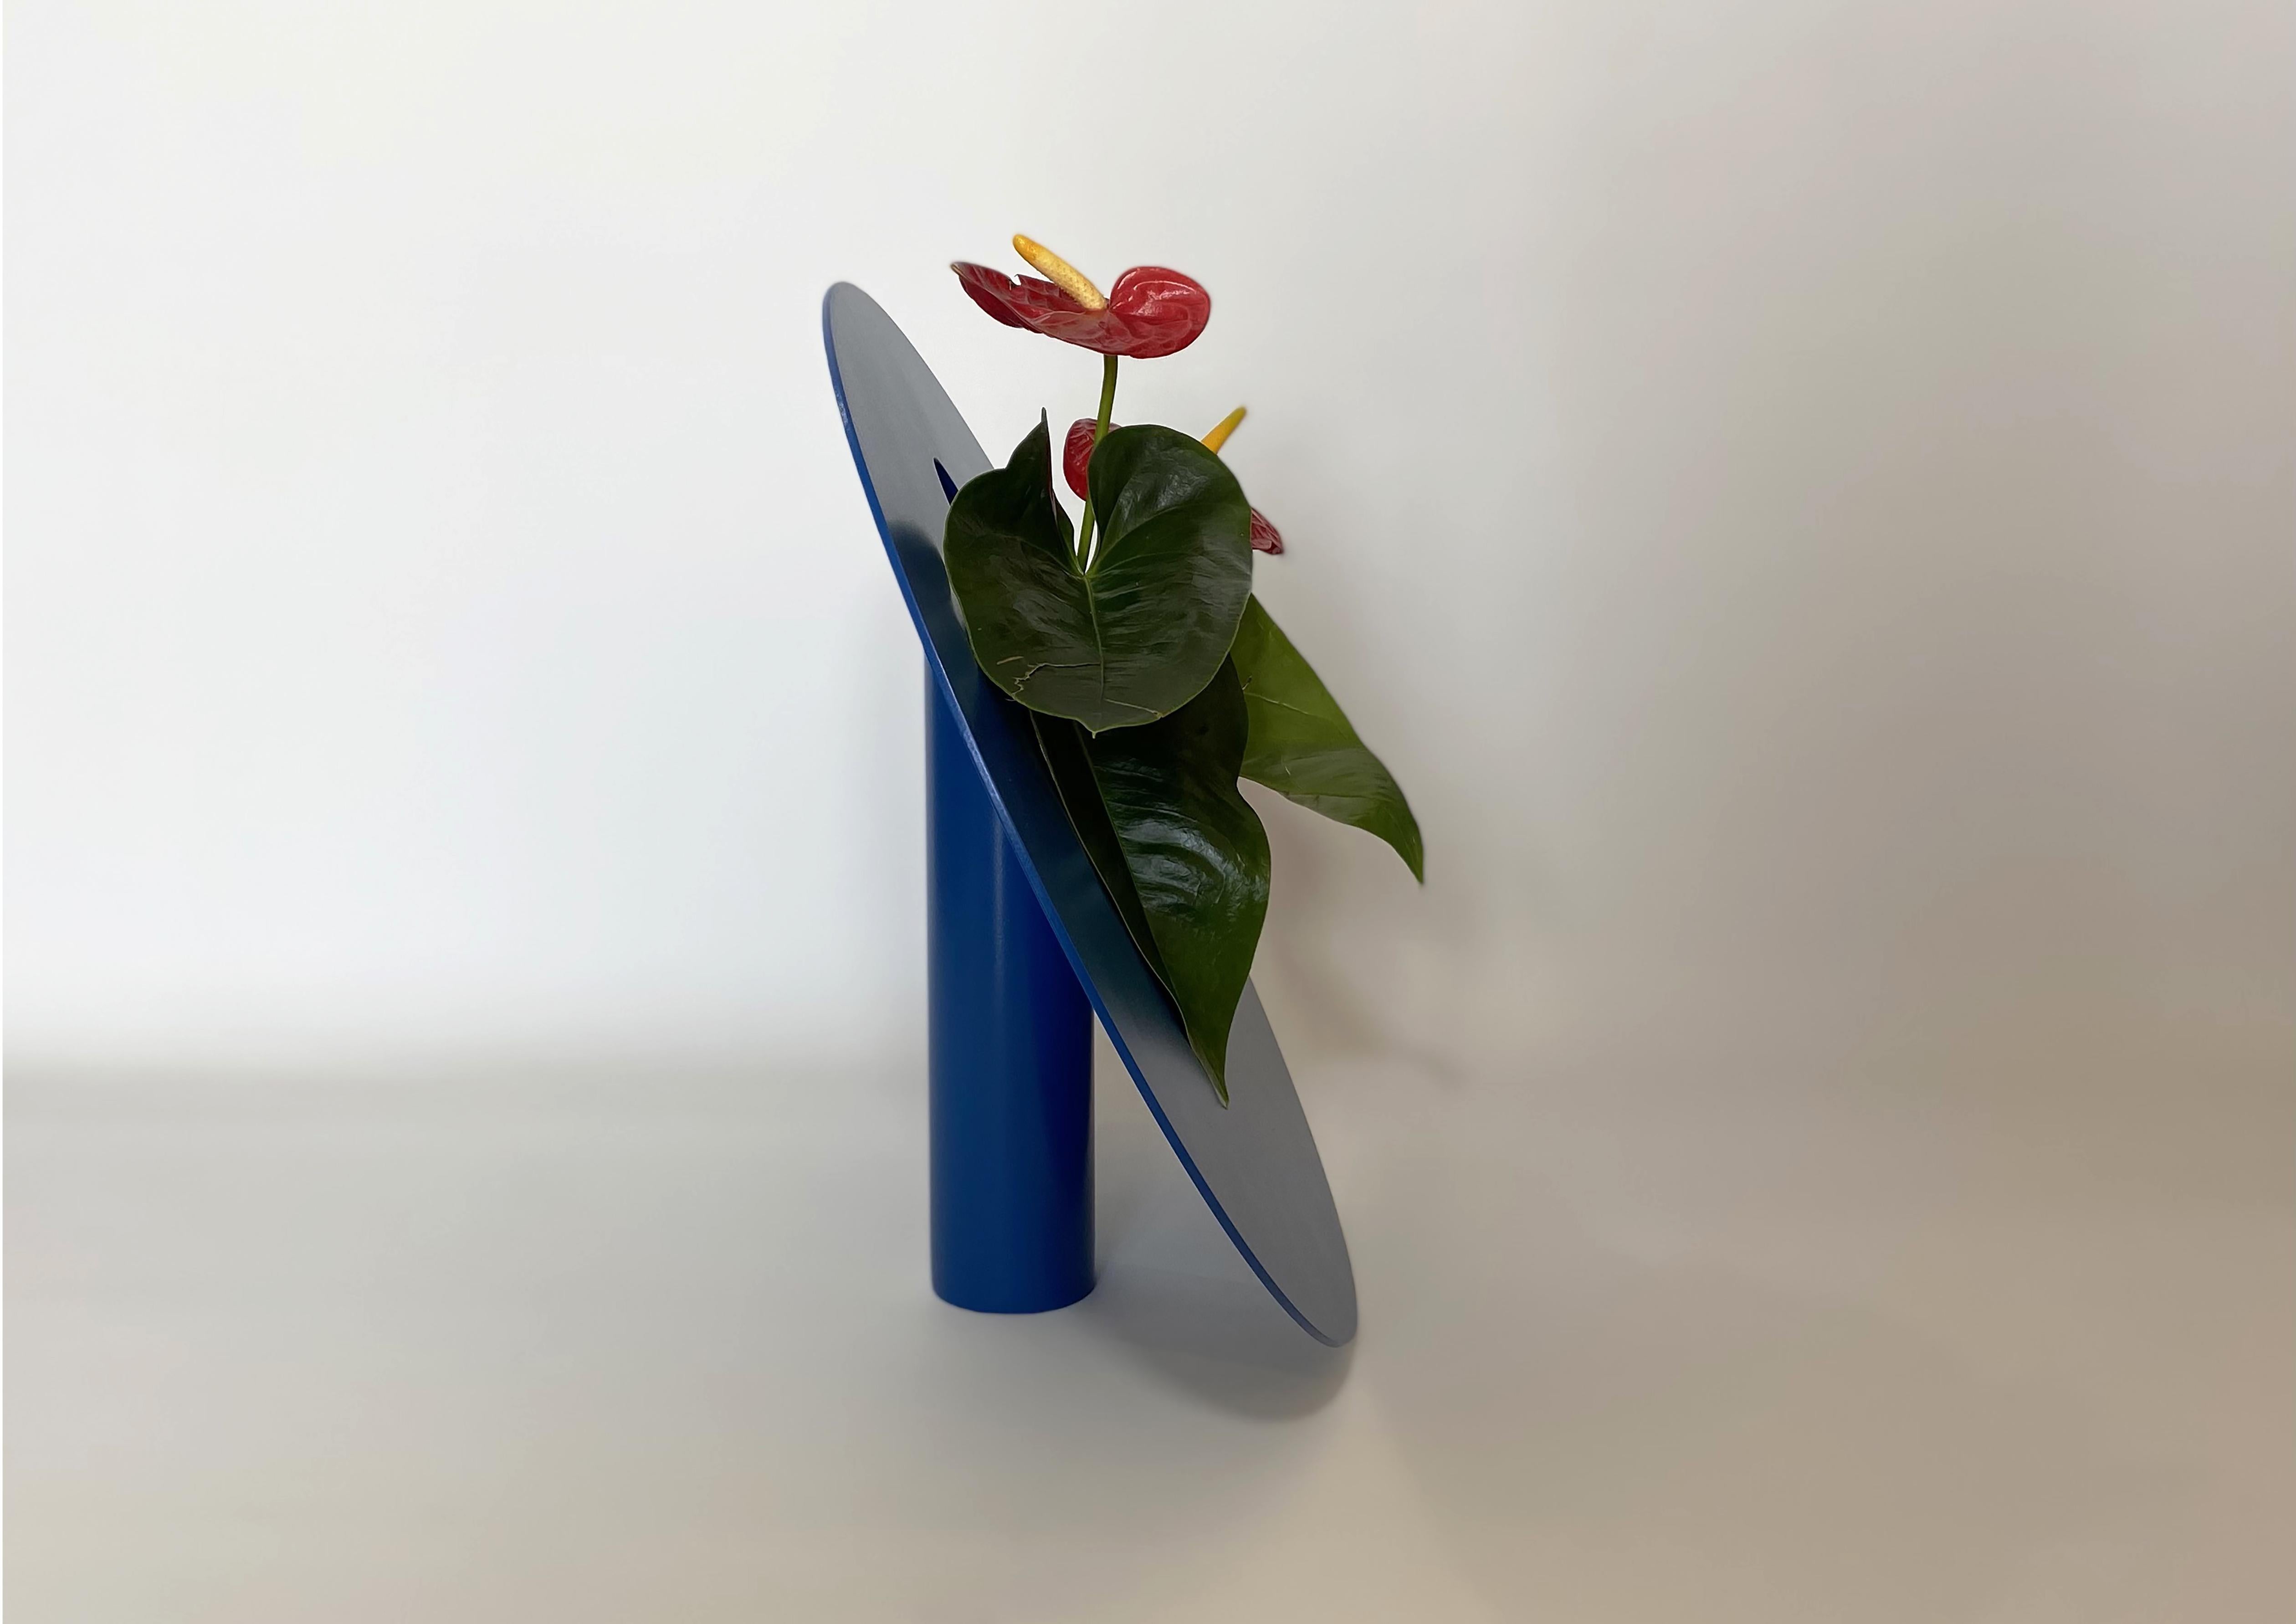 Hole dark blue vase by Shou.
Dimensions: D 40 x H 35 cm.
Materials: Stainless steel and electrostatic coated steel
Colour: dark blue

'Hole' vase inspired by the obscurity of the universe and black holes. The circular shape represents the